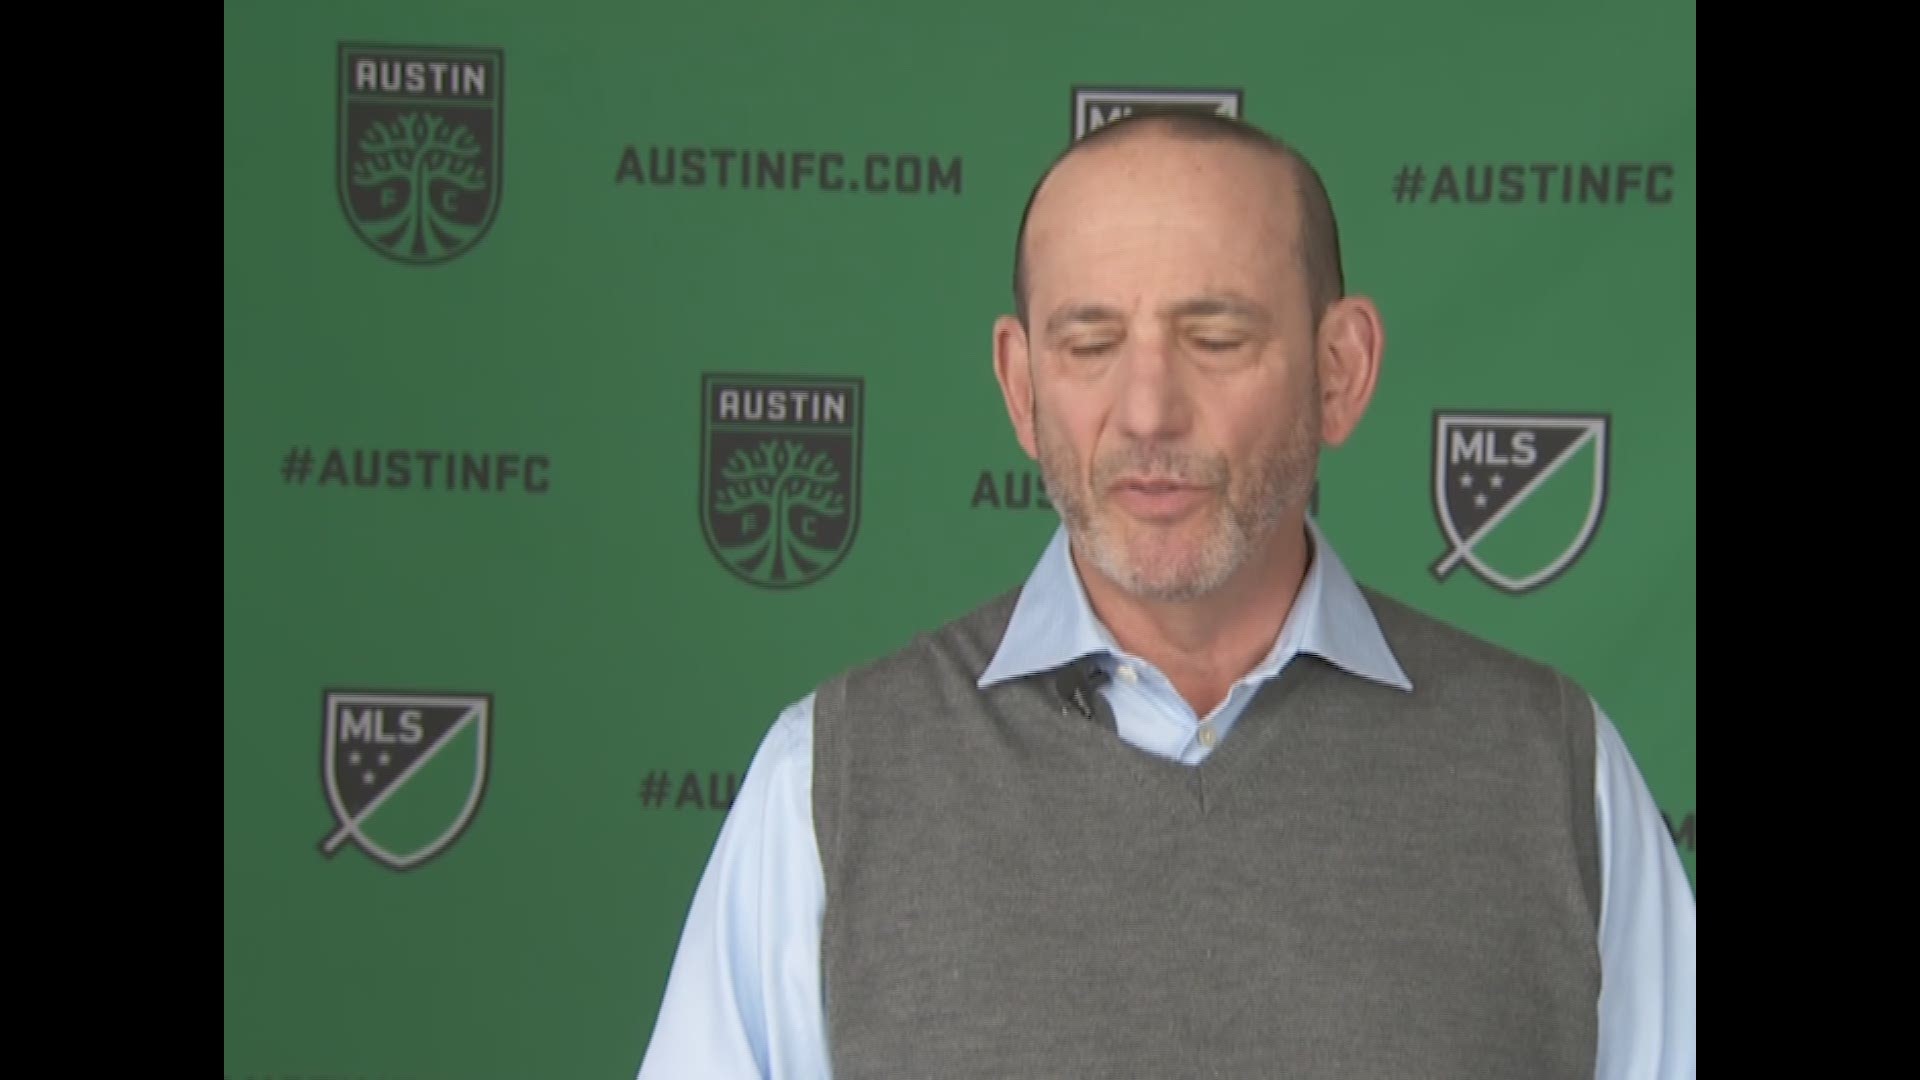 MLS Commissioner Don Garber spoke with KVUE on how bringing Austin FC to the city will help grow the sport.